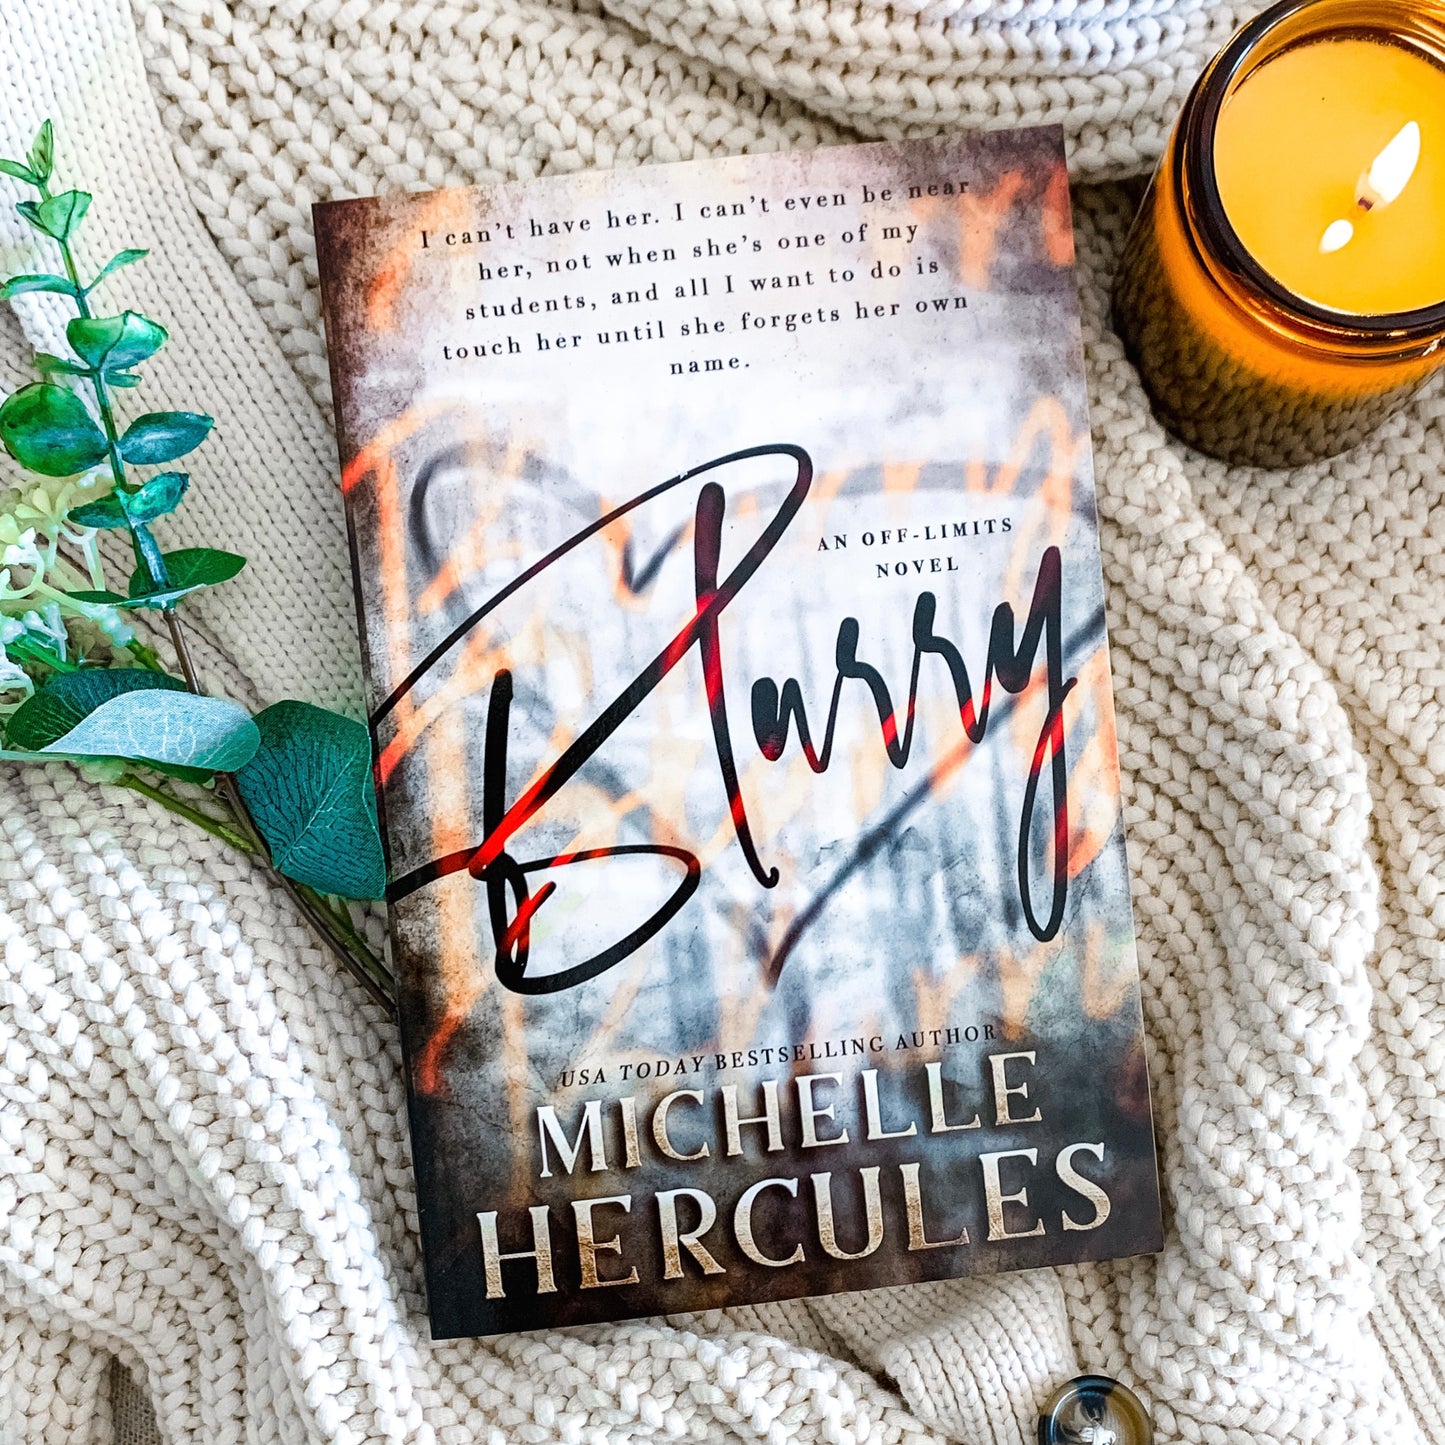 Blurry (Special Edition) by Michelle Hercules